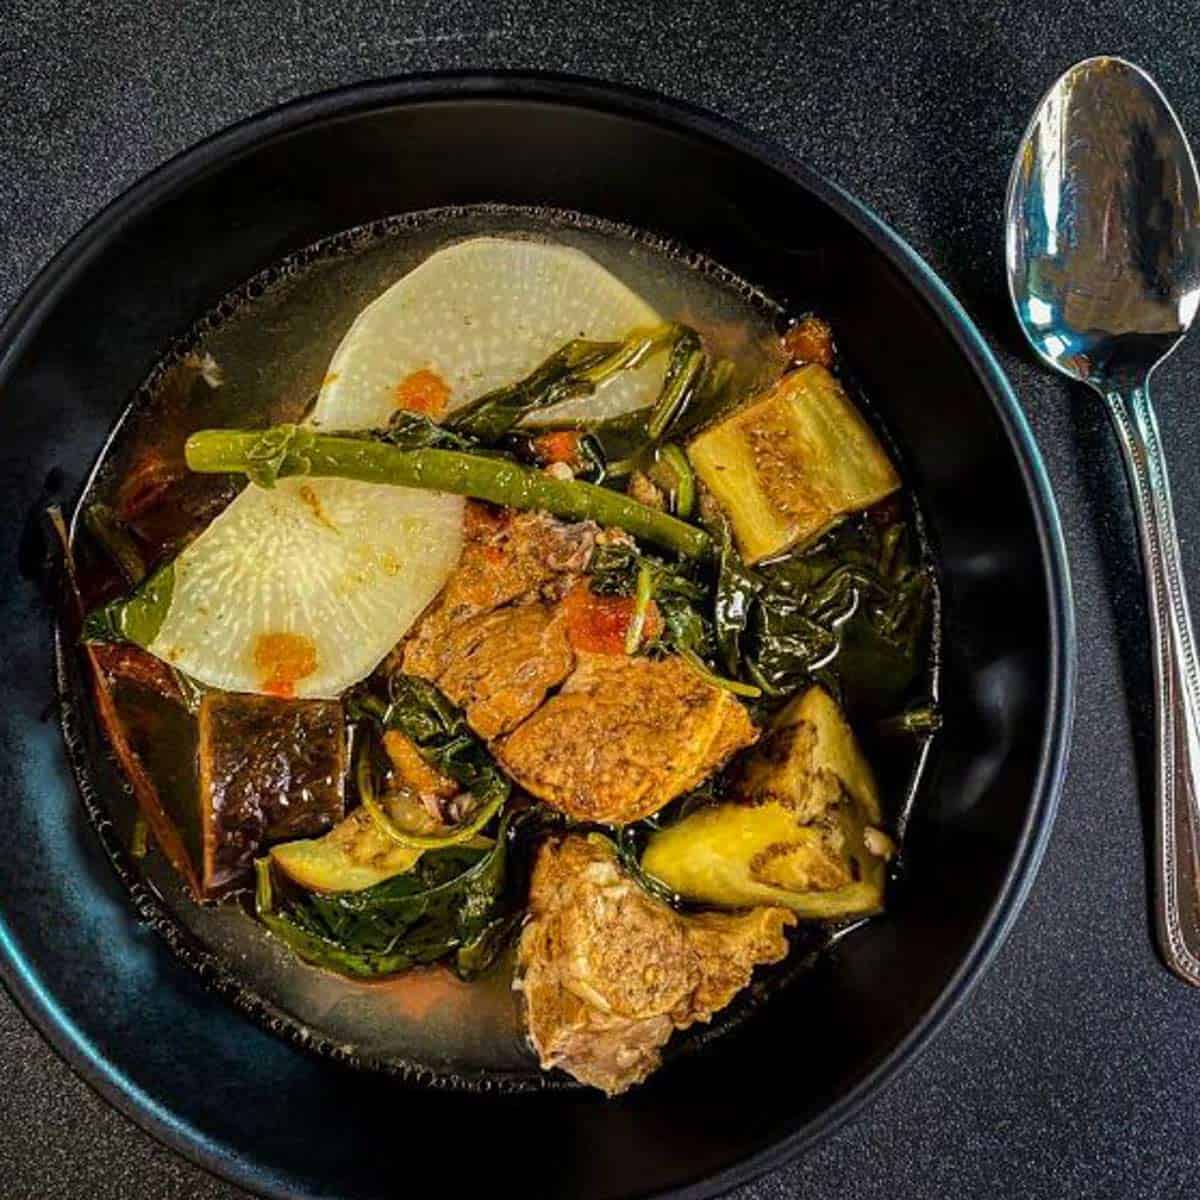 Sinigang Pork in black bowl with rutabaga, eggplant, spinach, green beans and tomatoes